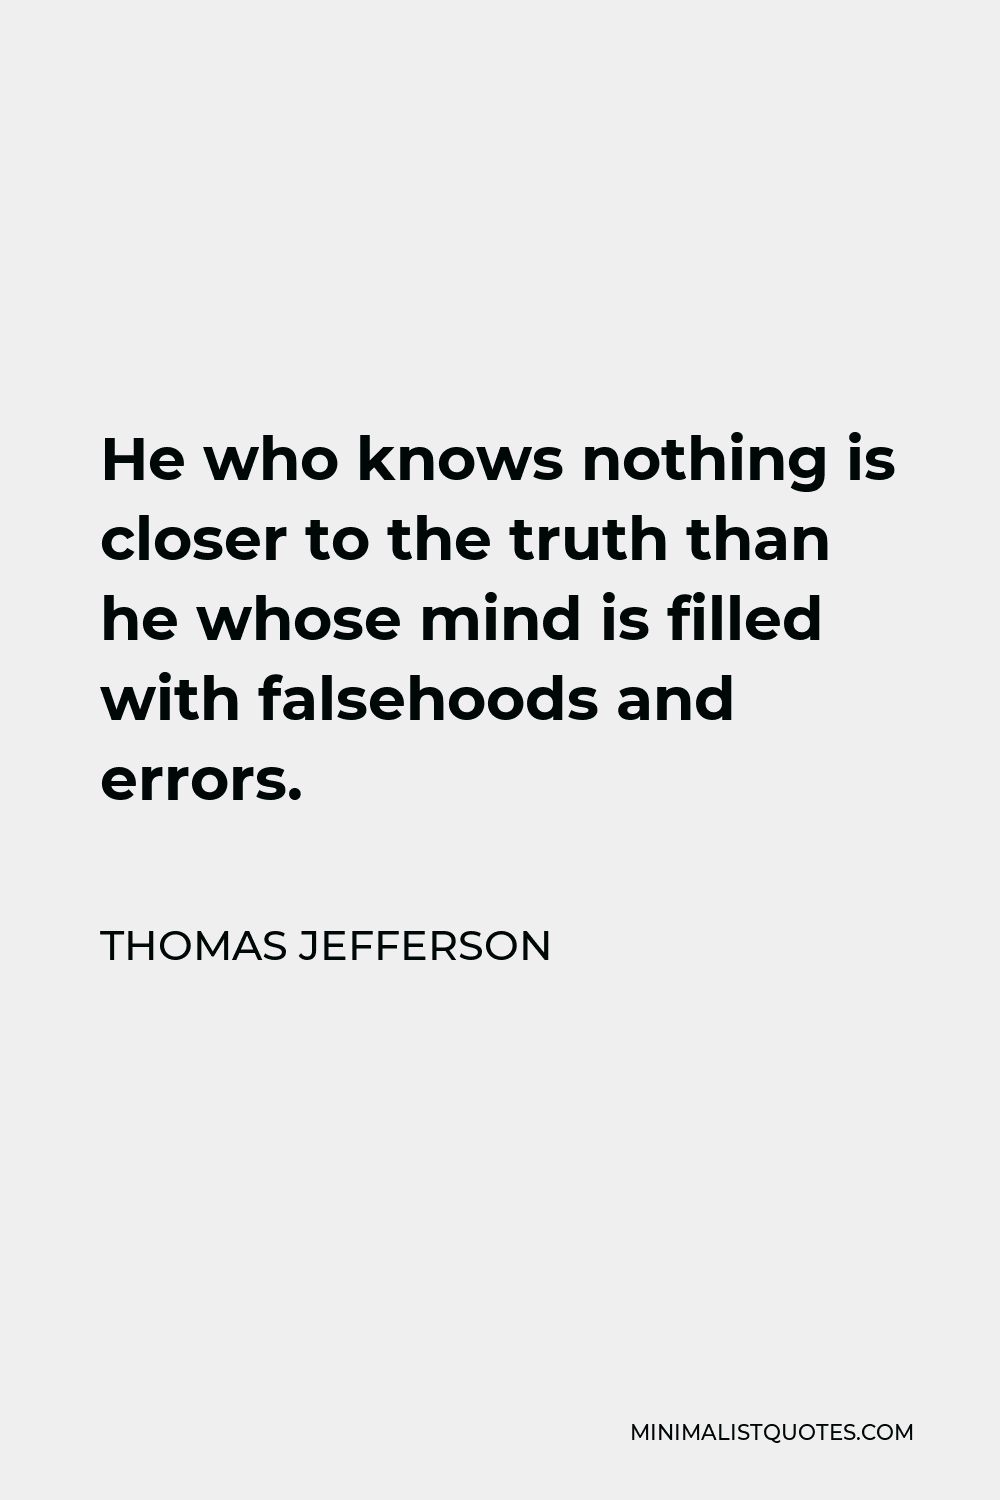 Thomas Jefferson Quote - He who knows nothing is closer to the truth than he whose mind is filled with falsehoods and errors.